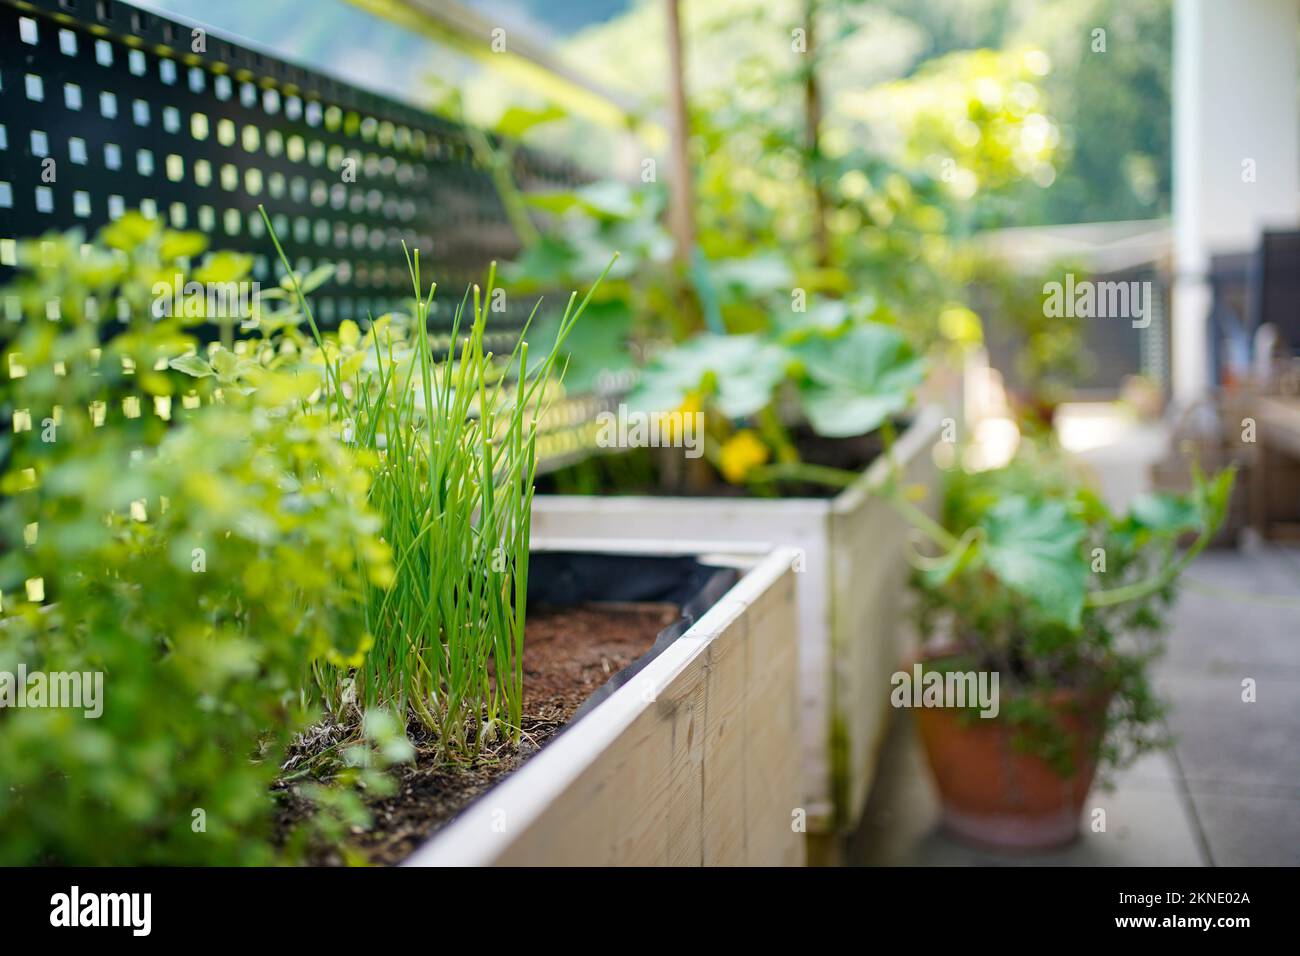 Herbs growing in a raised bed on a balcony garden beneath potted plants. Stock Photo